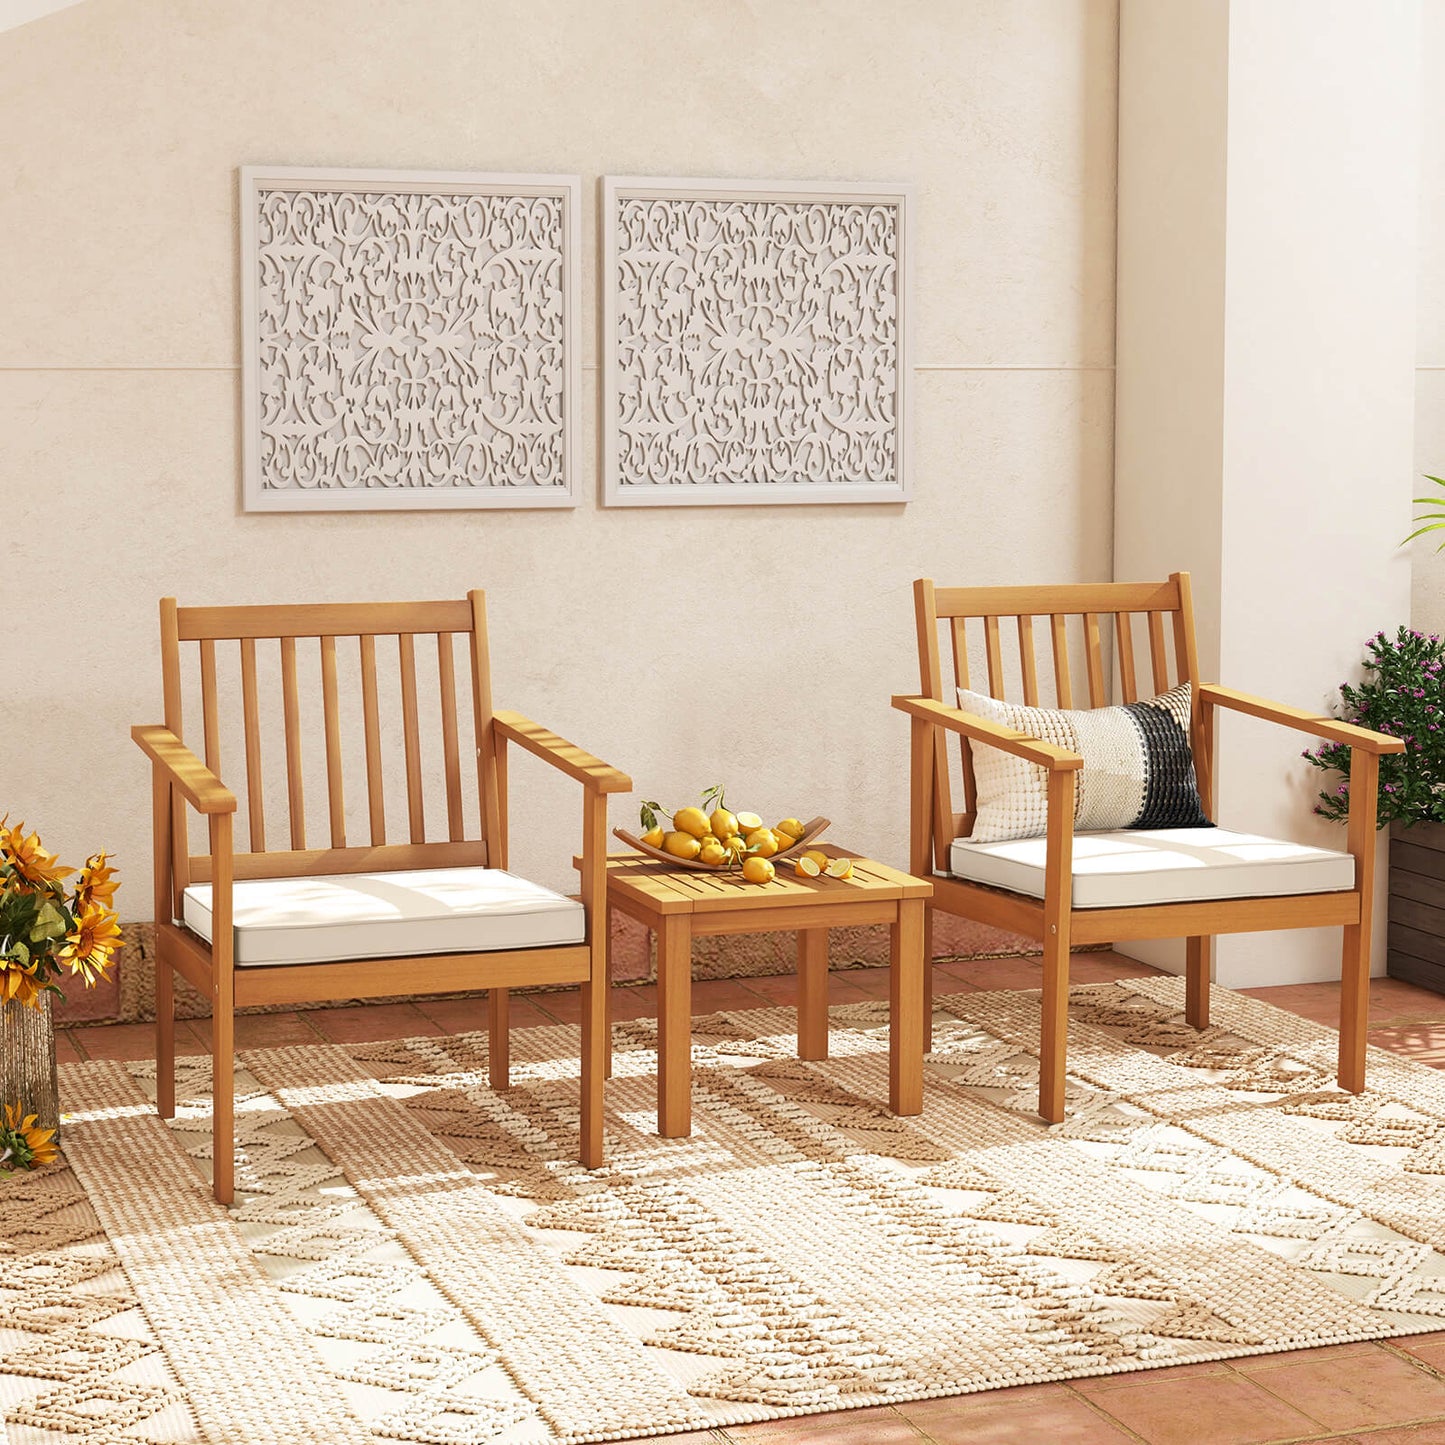 3 Pieces Patio Wood Furniture Set with soft Cushions for Porch-White